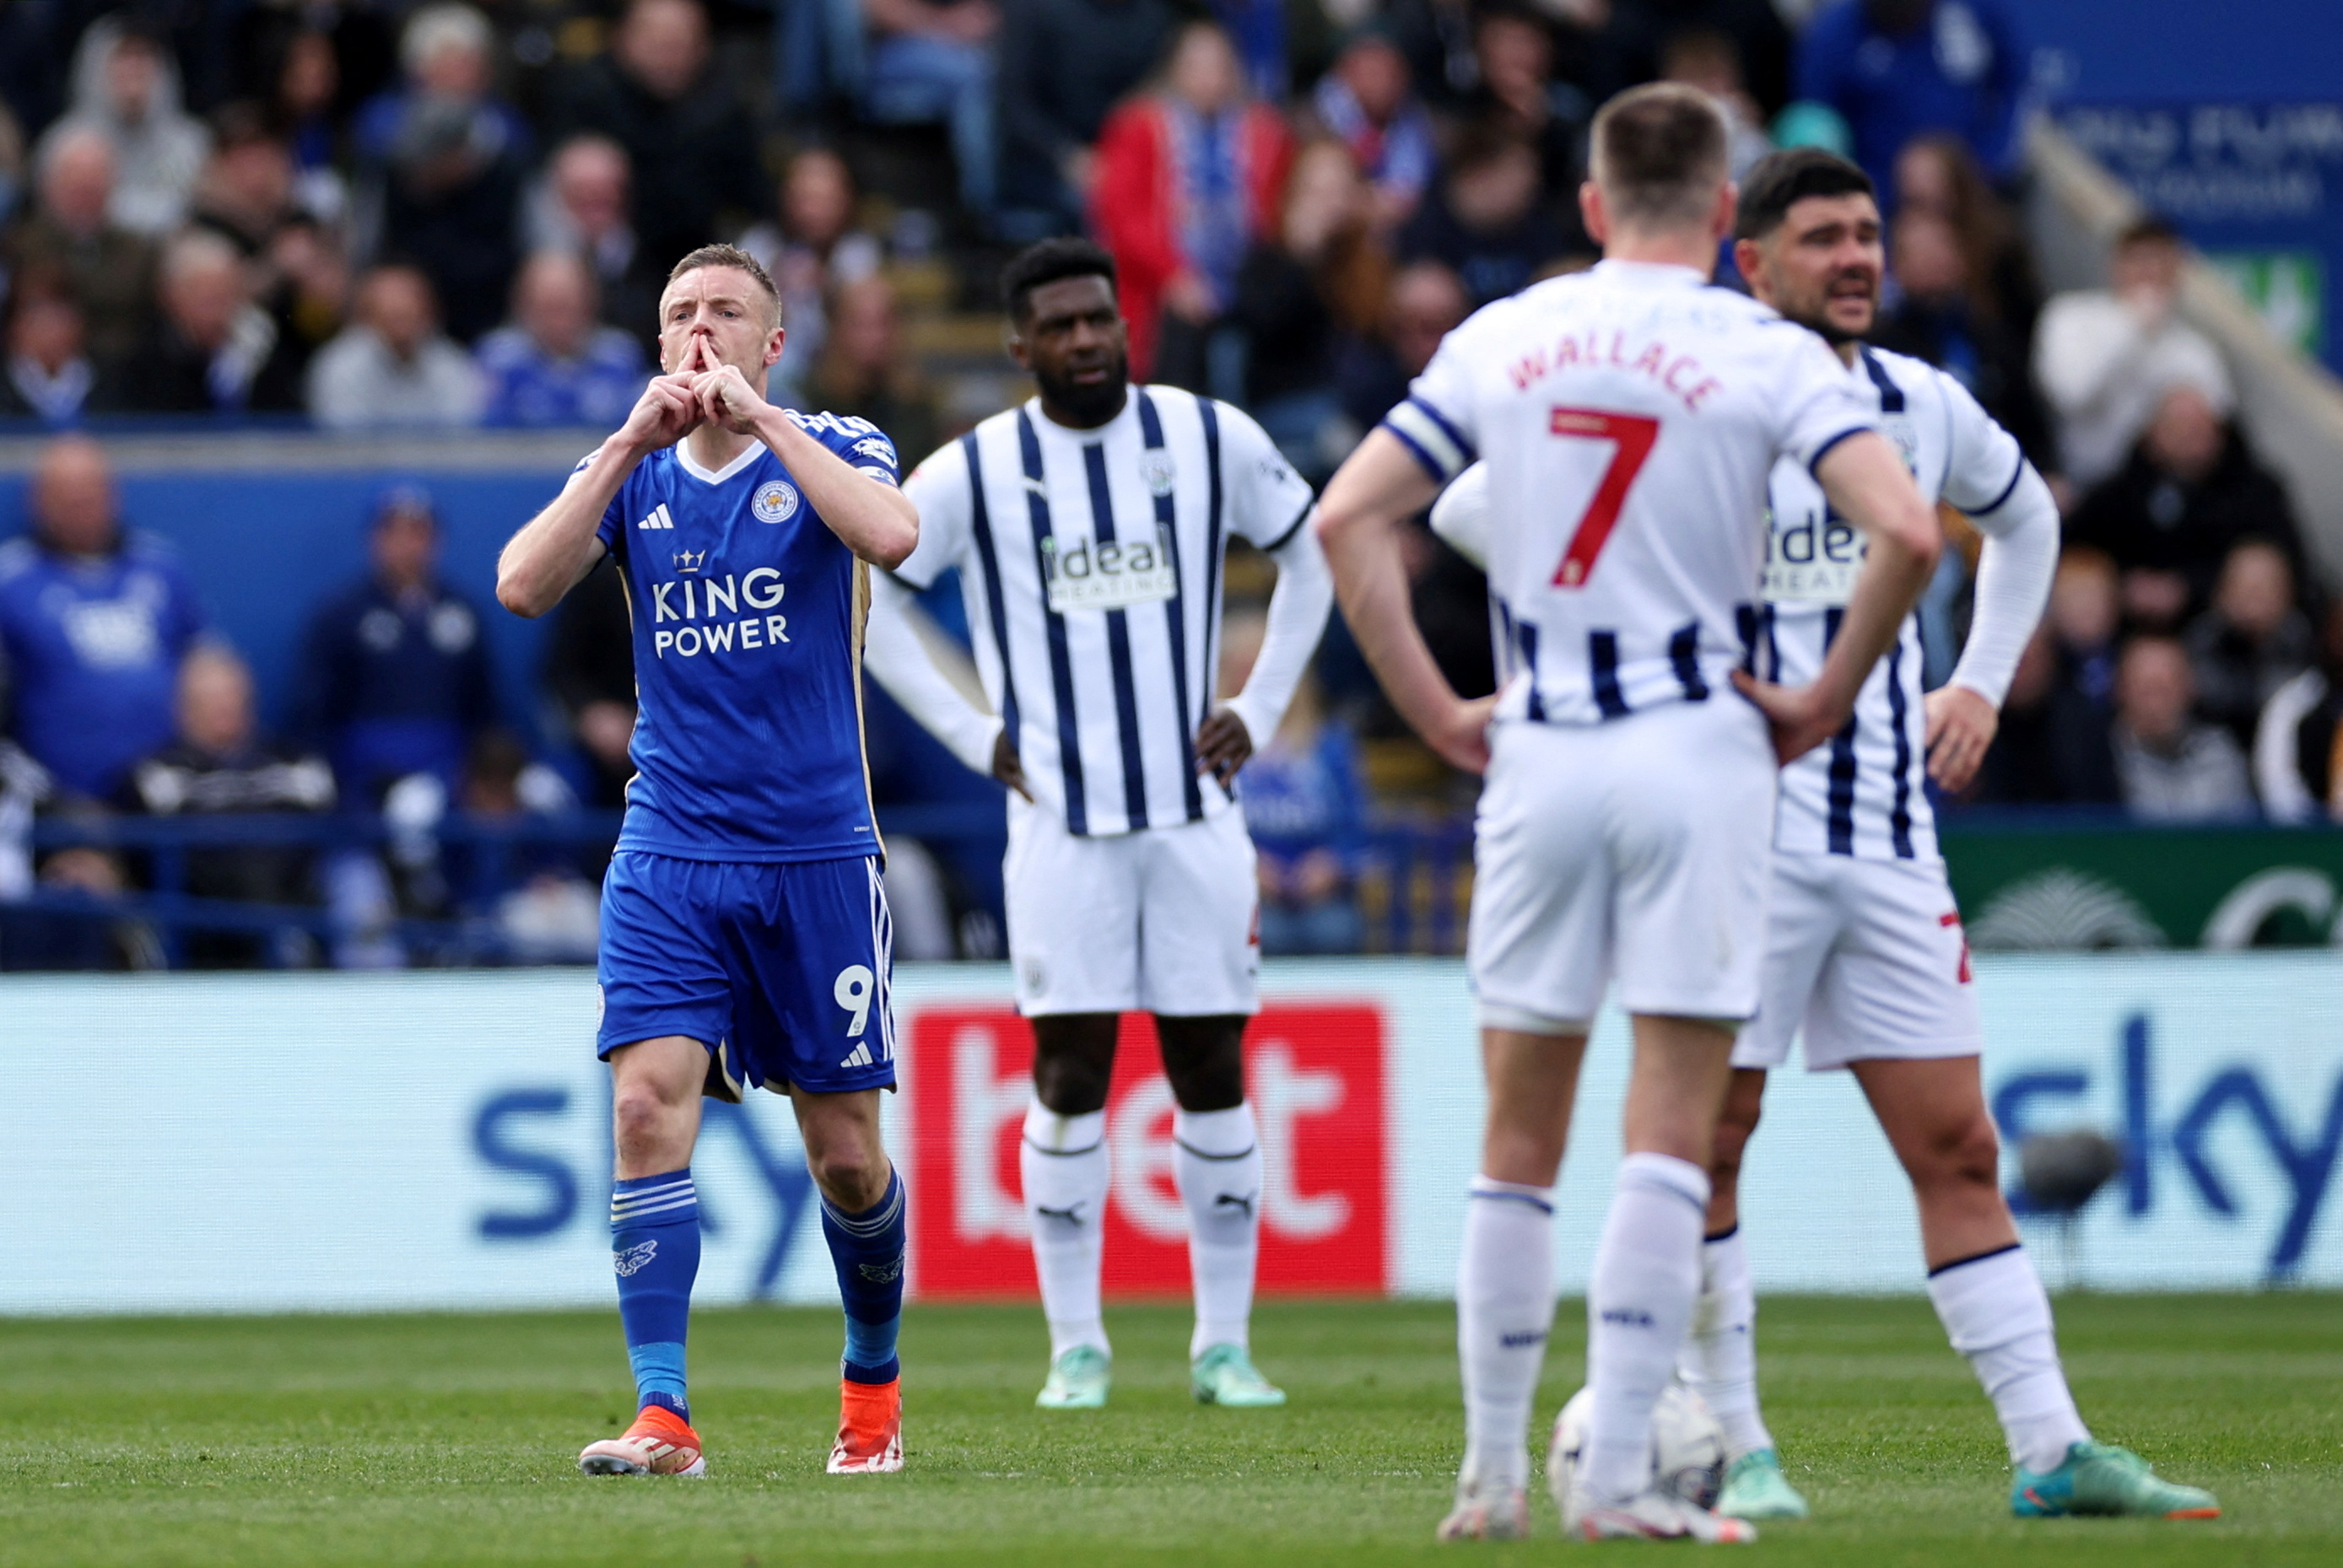 Championship - Leicester City v West Bromwich Albion